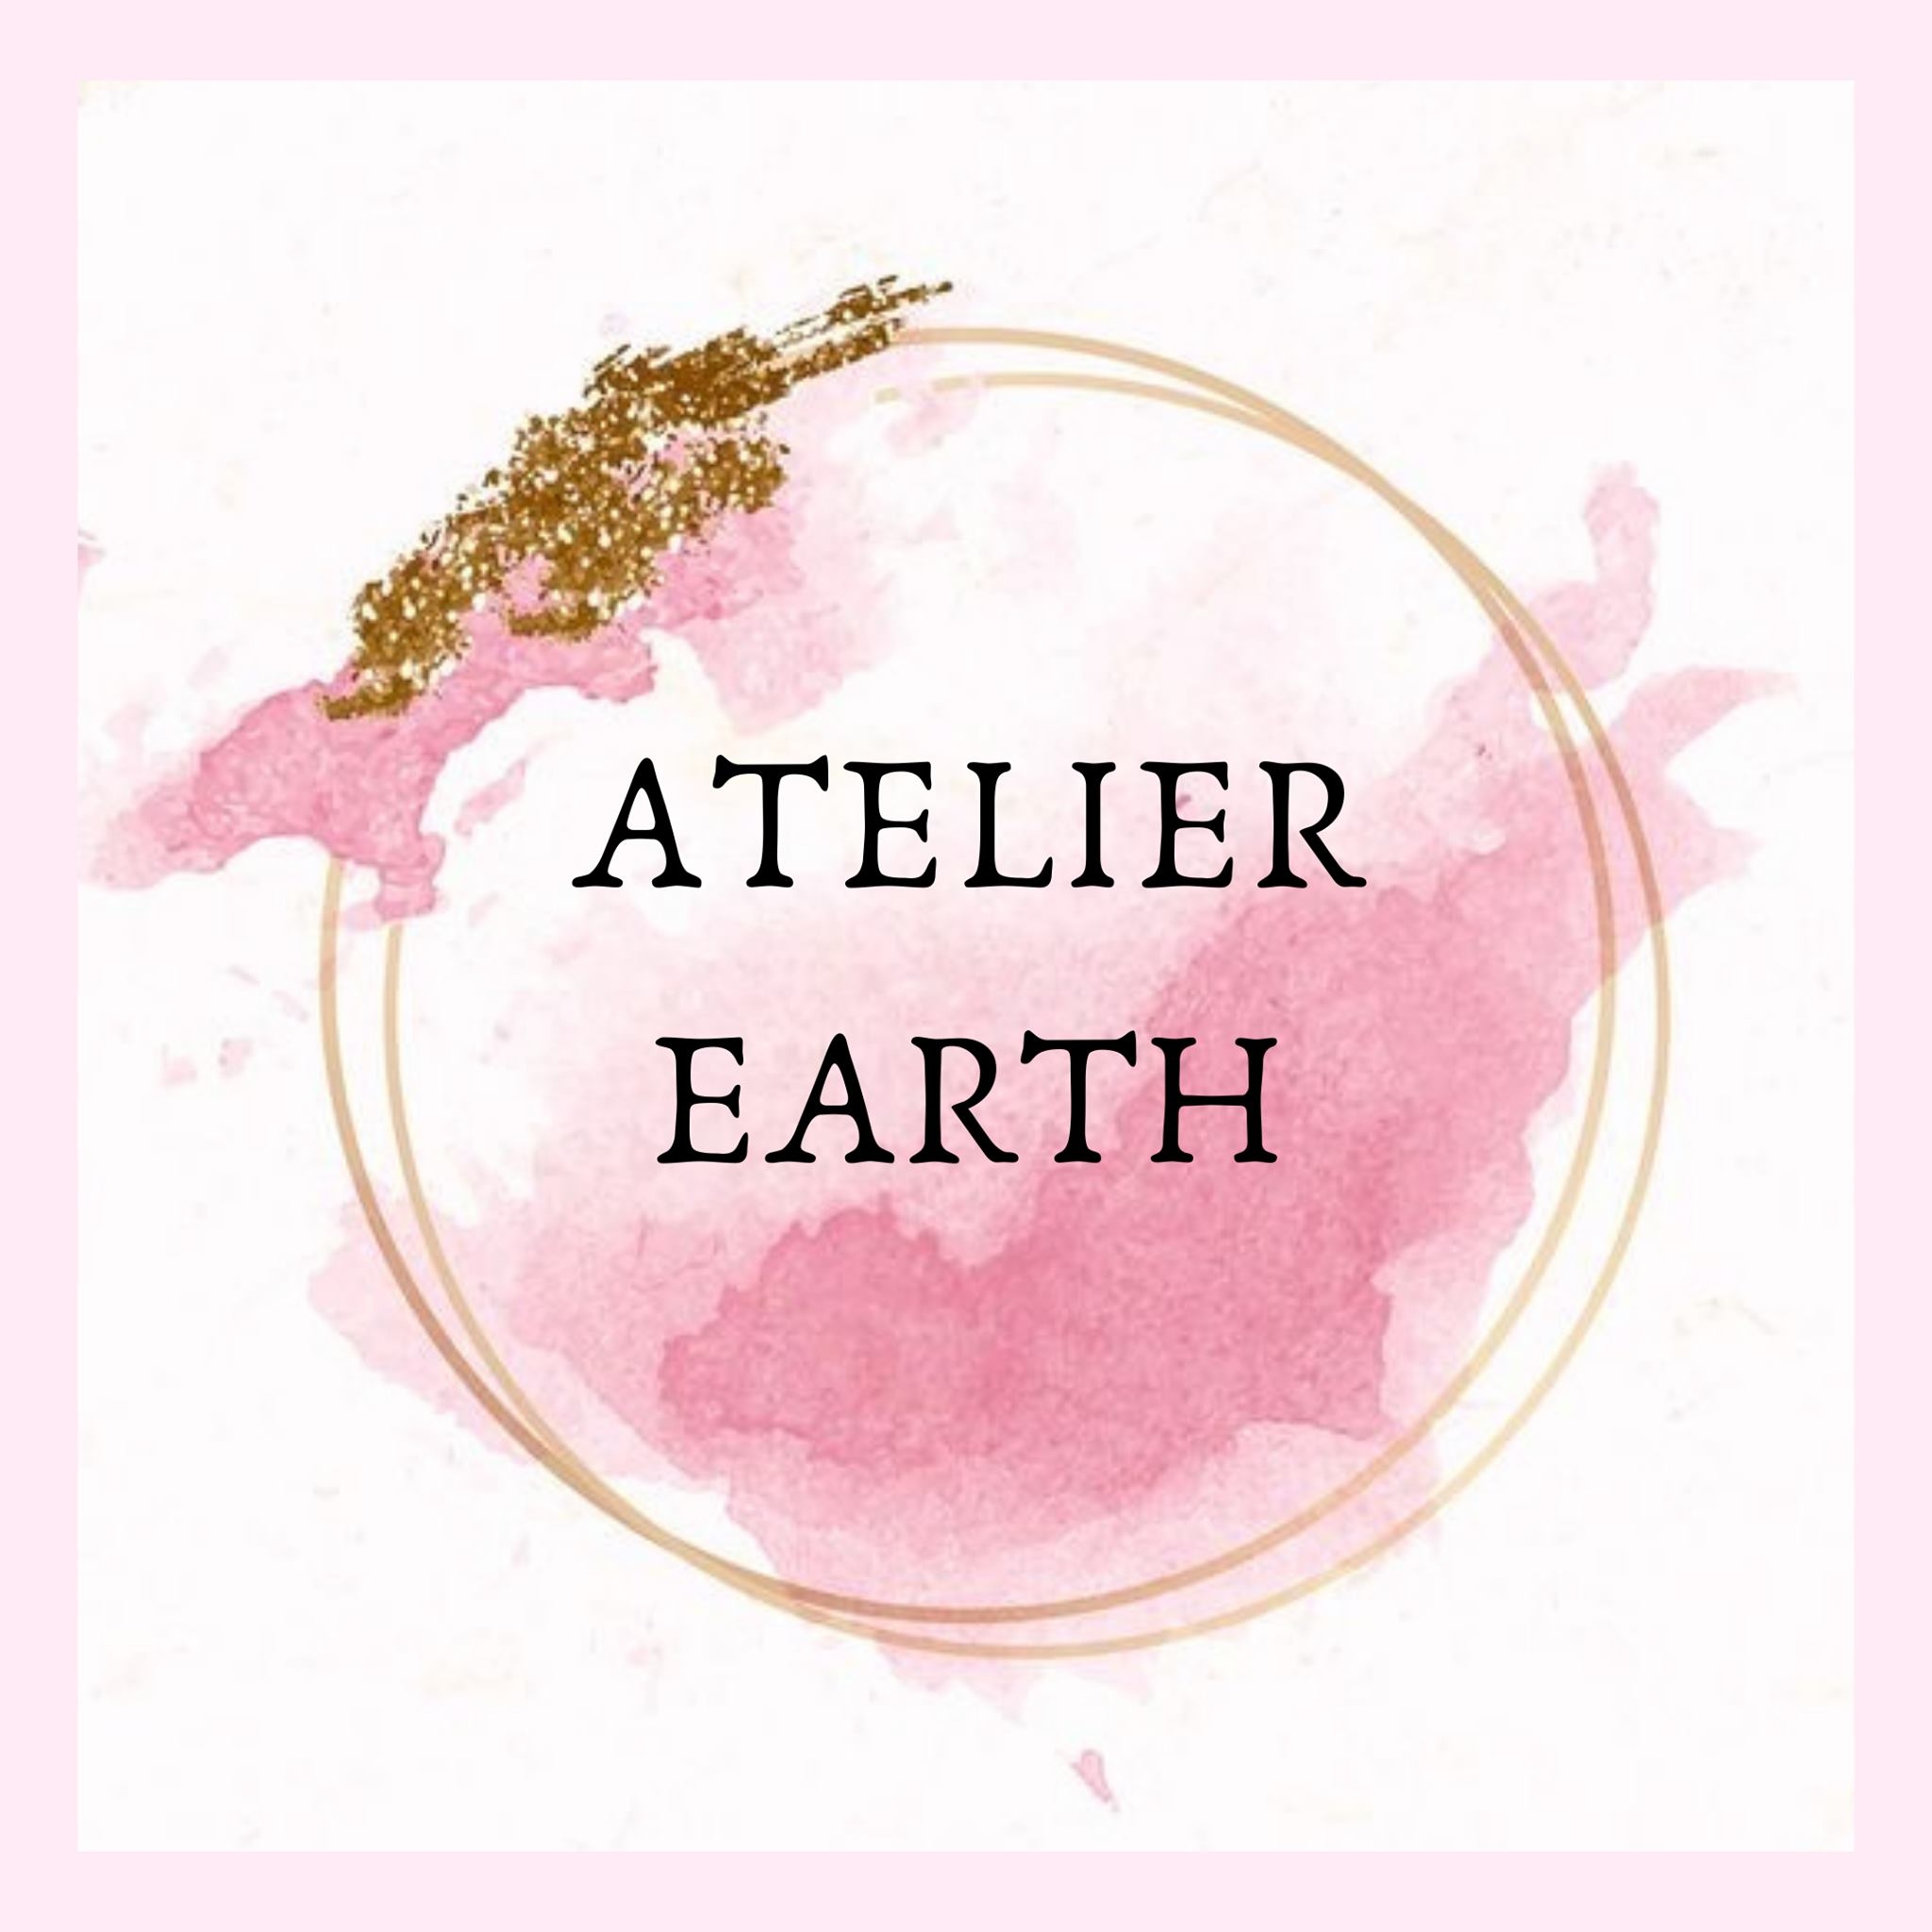 Atelier Earth|Accounting Services|Professional Services